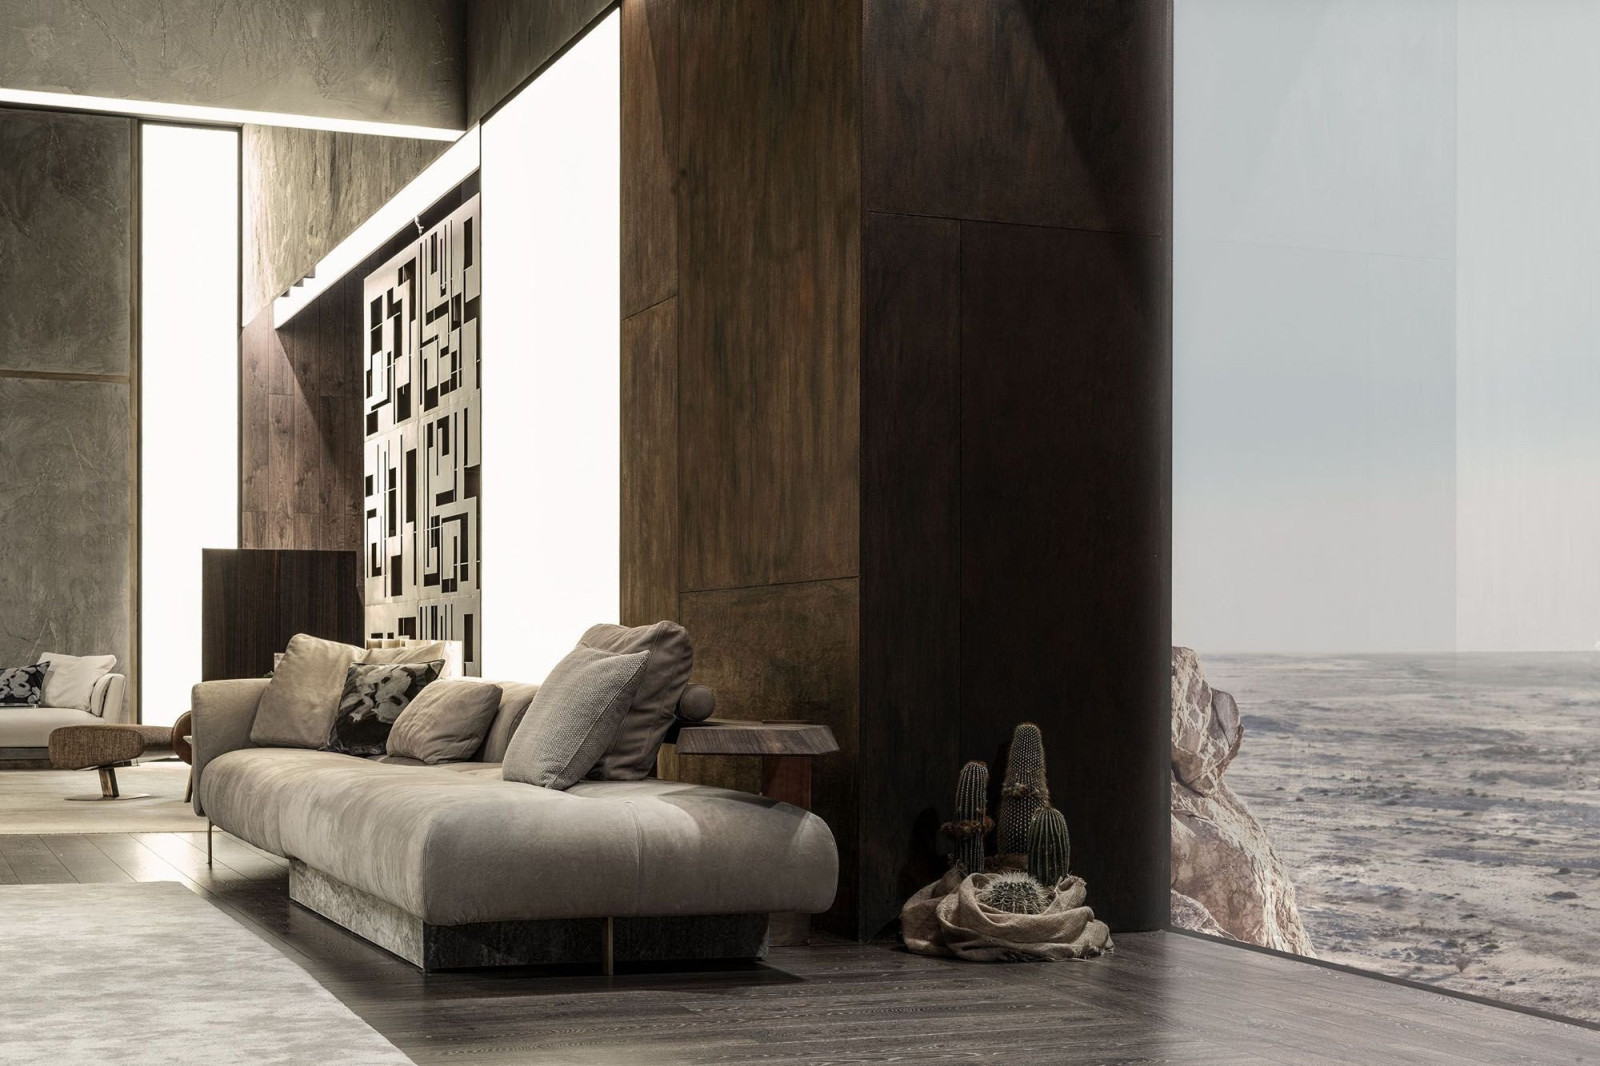 Materia Wall Unit and Canyon Sofa together